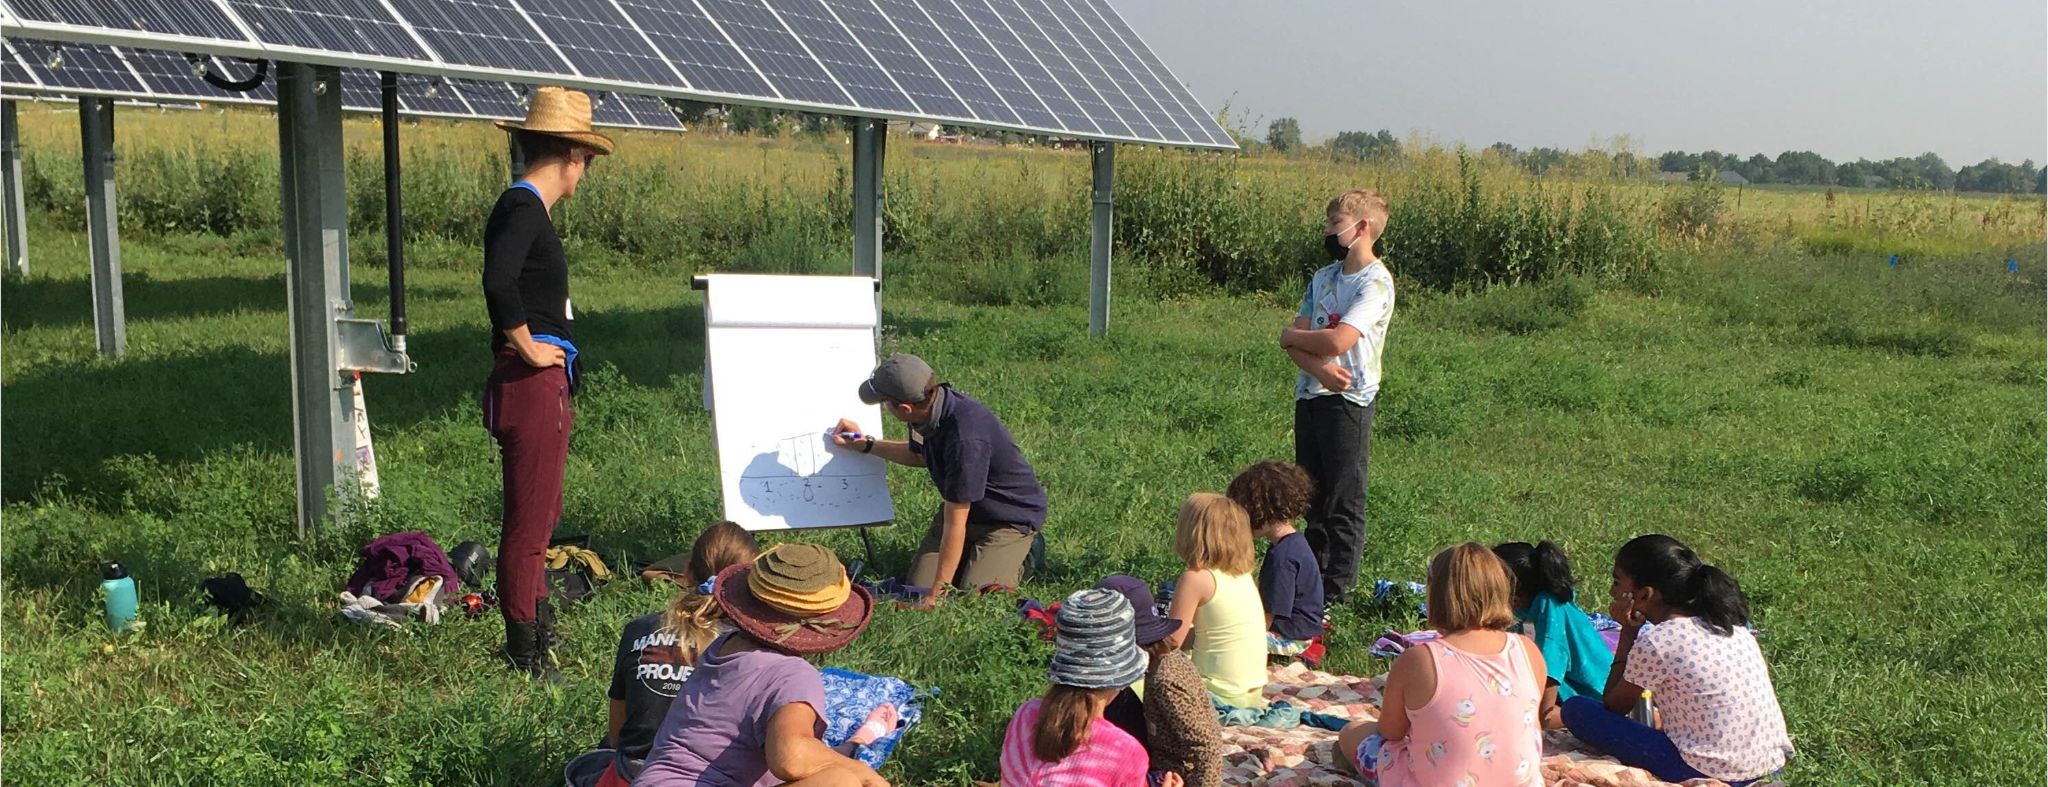 two adults demonstrate filmmaking storyboarding to children at a dance film workshop on a working solar farm